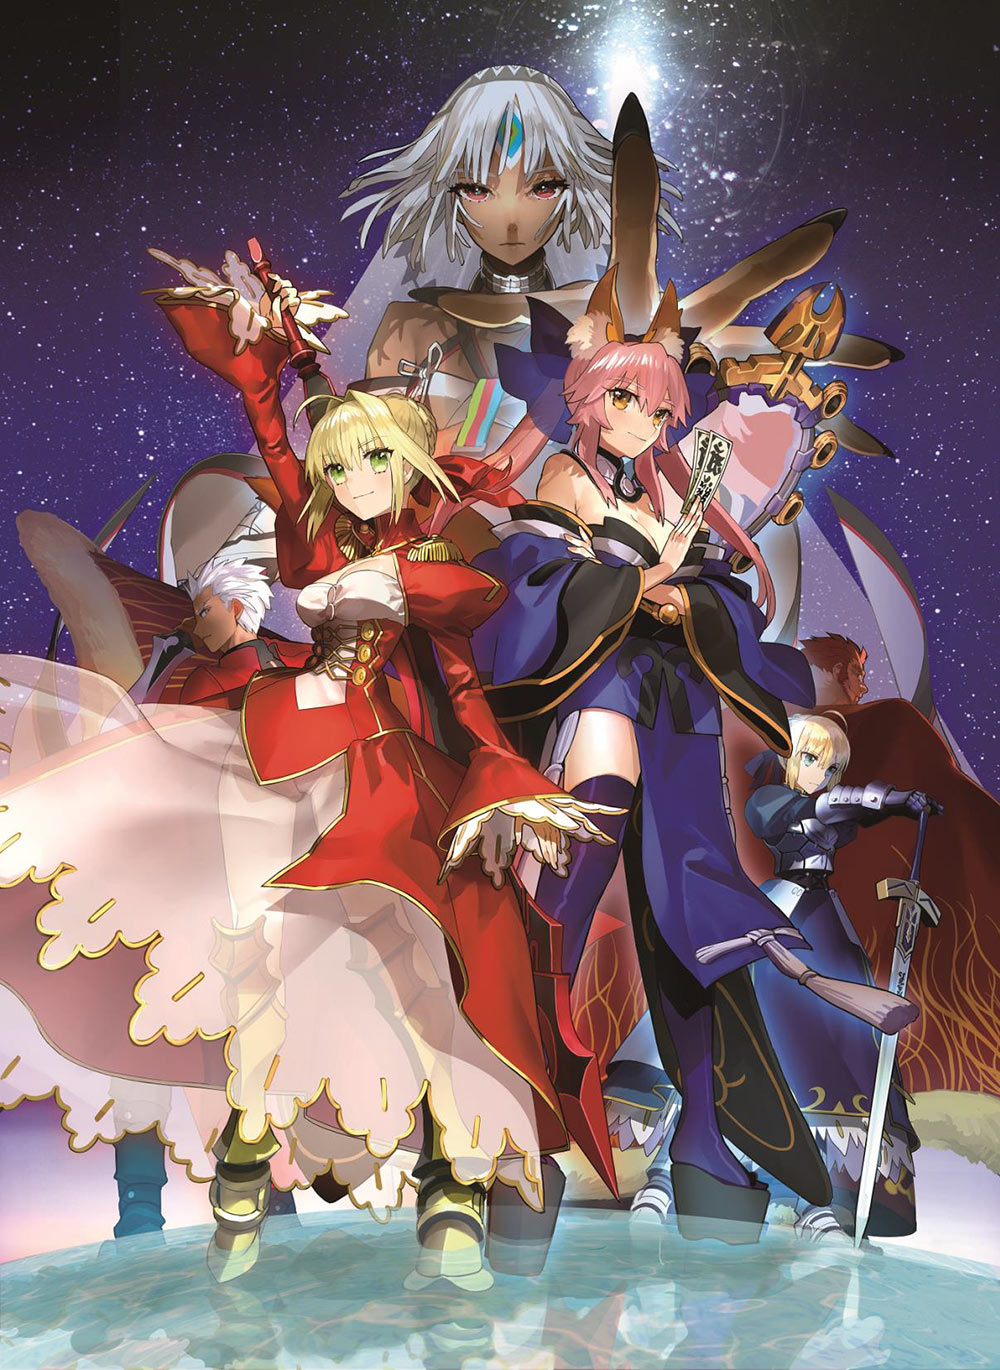 Fate/Extella: The Umbral Star Art by Aruko Wada